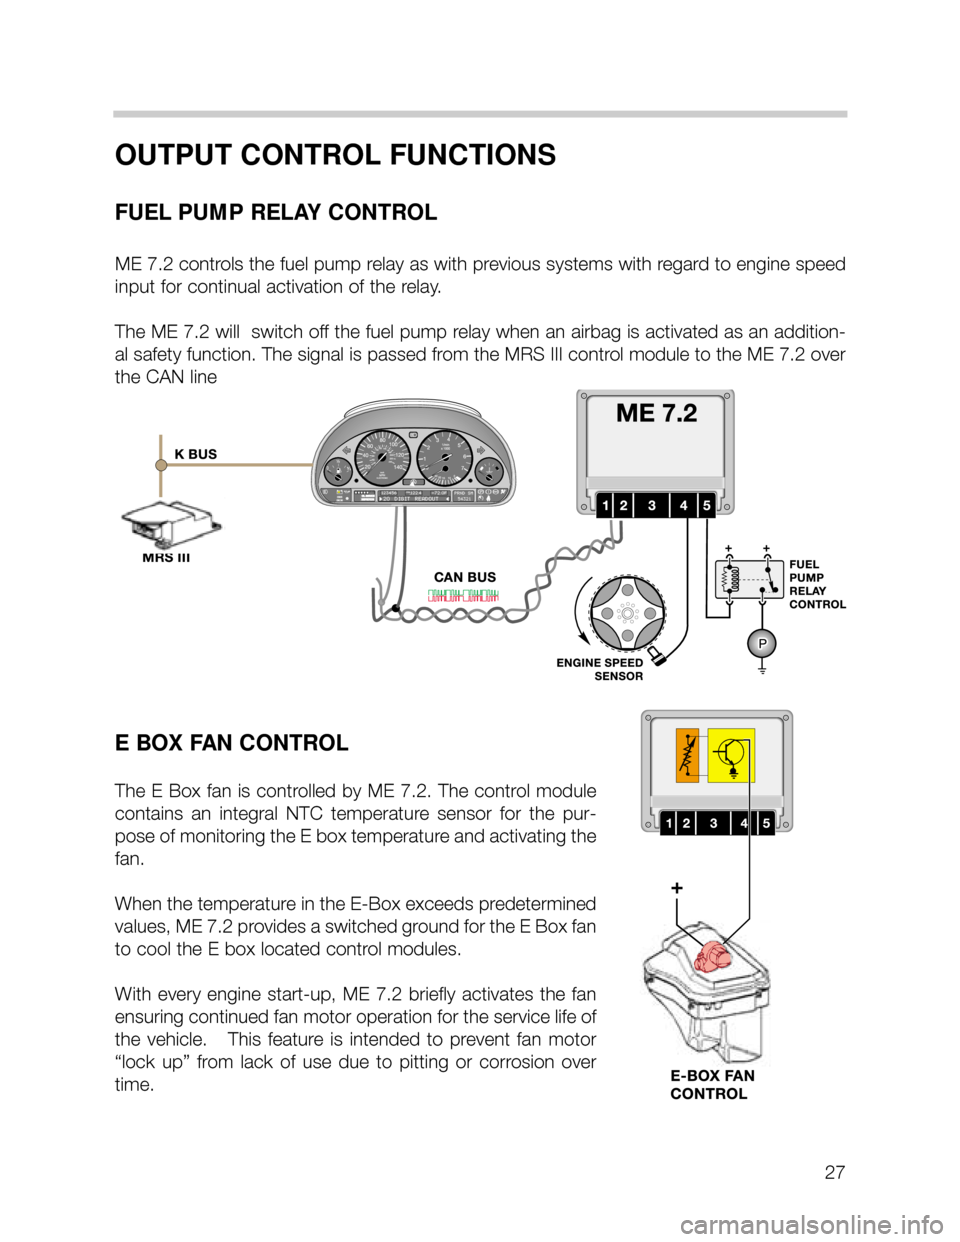 BMW X5 2001 E53 M62TU Engine Owners Manual 27
OUTPUT CONTROL FUNCTIONS
FUEL PUMP RELAY CONTROL
ME 7.2 controls the fuel pump relay as with previous systems with regard to engine speed
input for continual activation of the relay.  
The ME 7.2 w